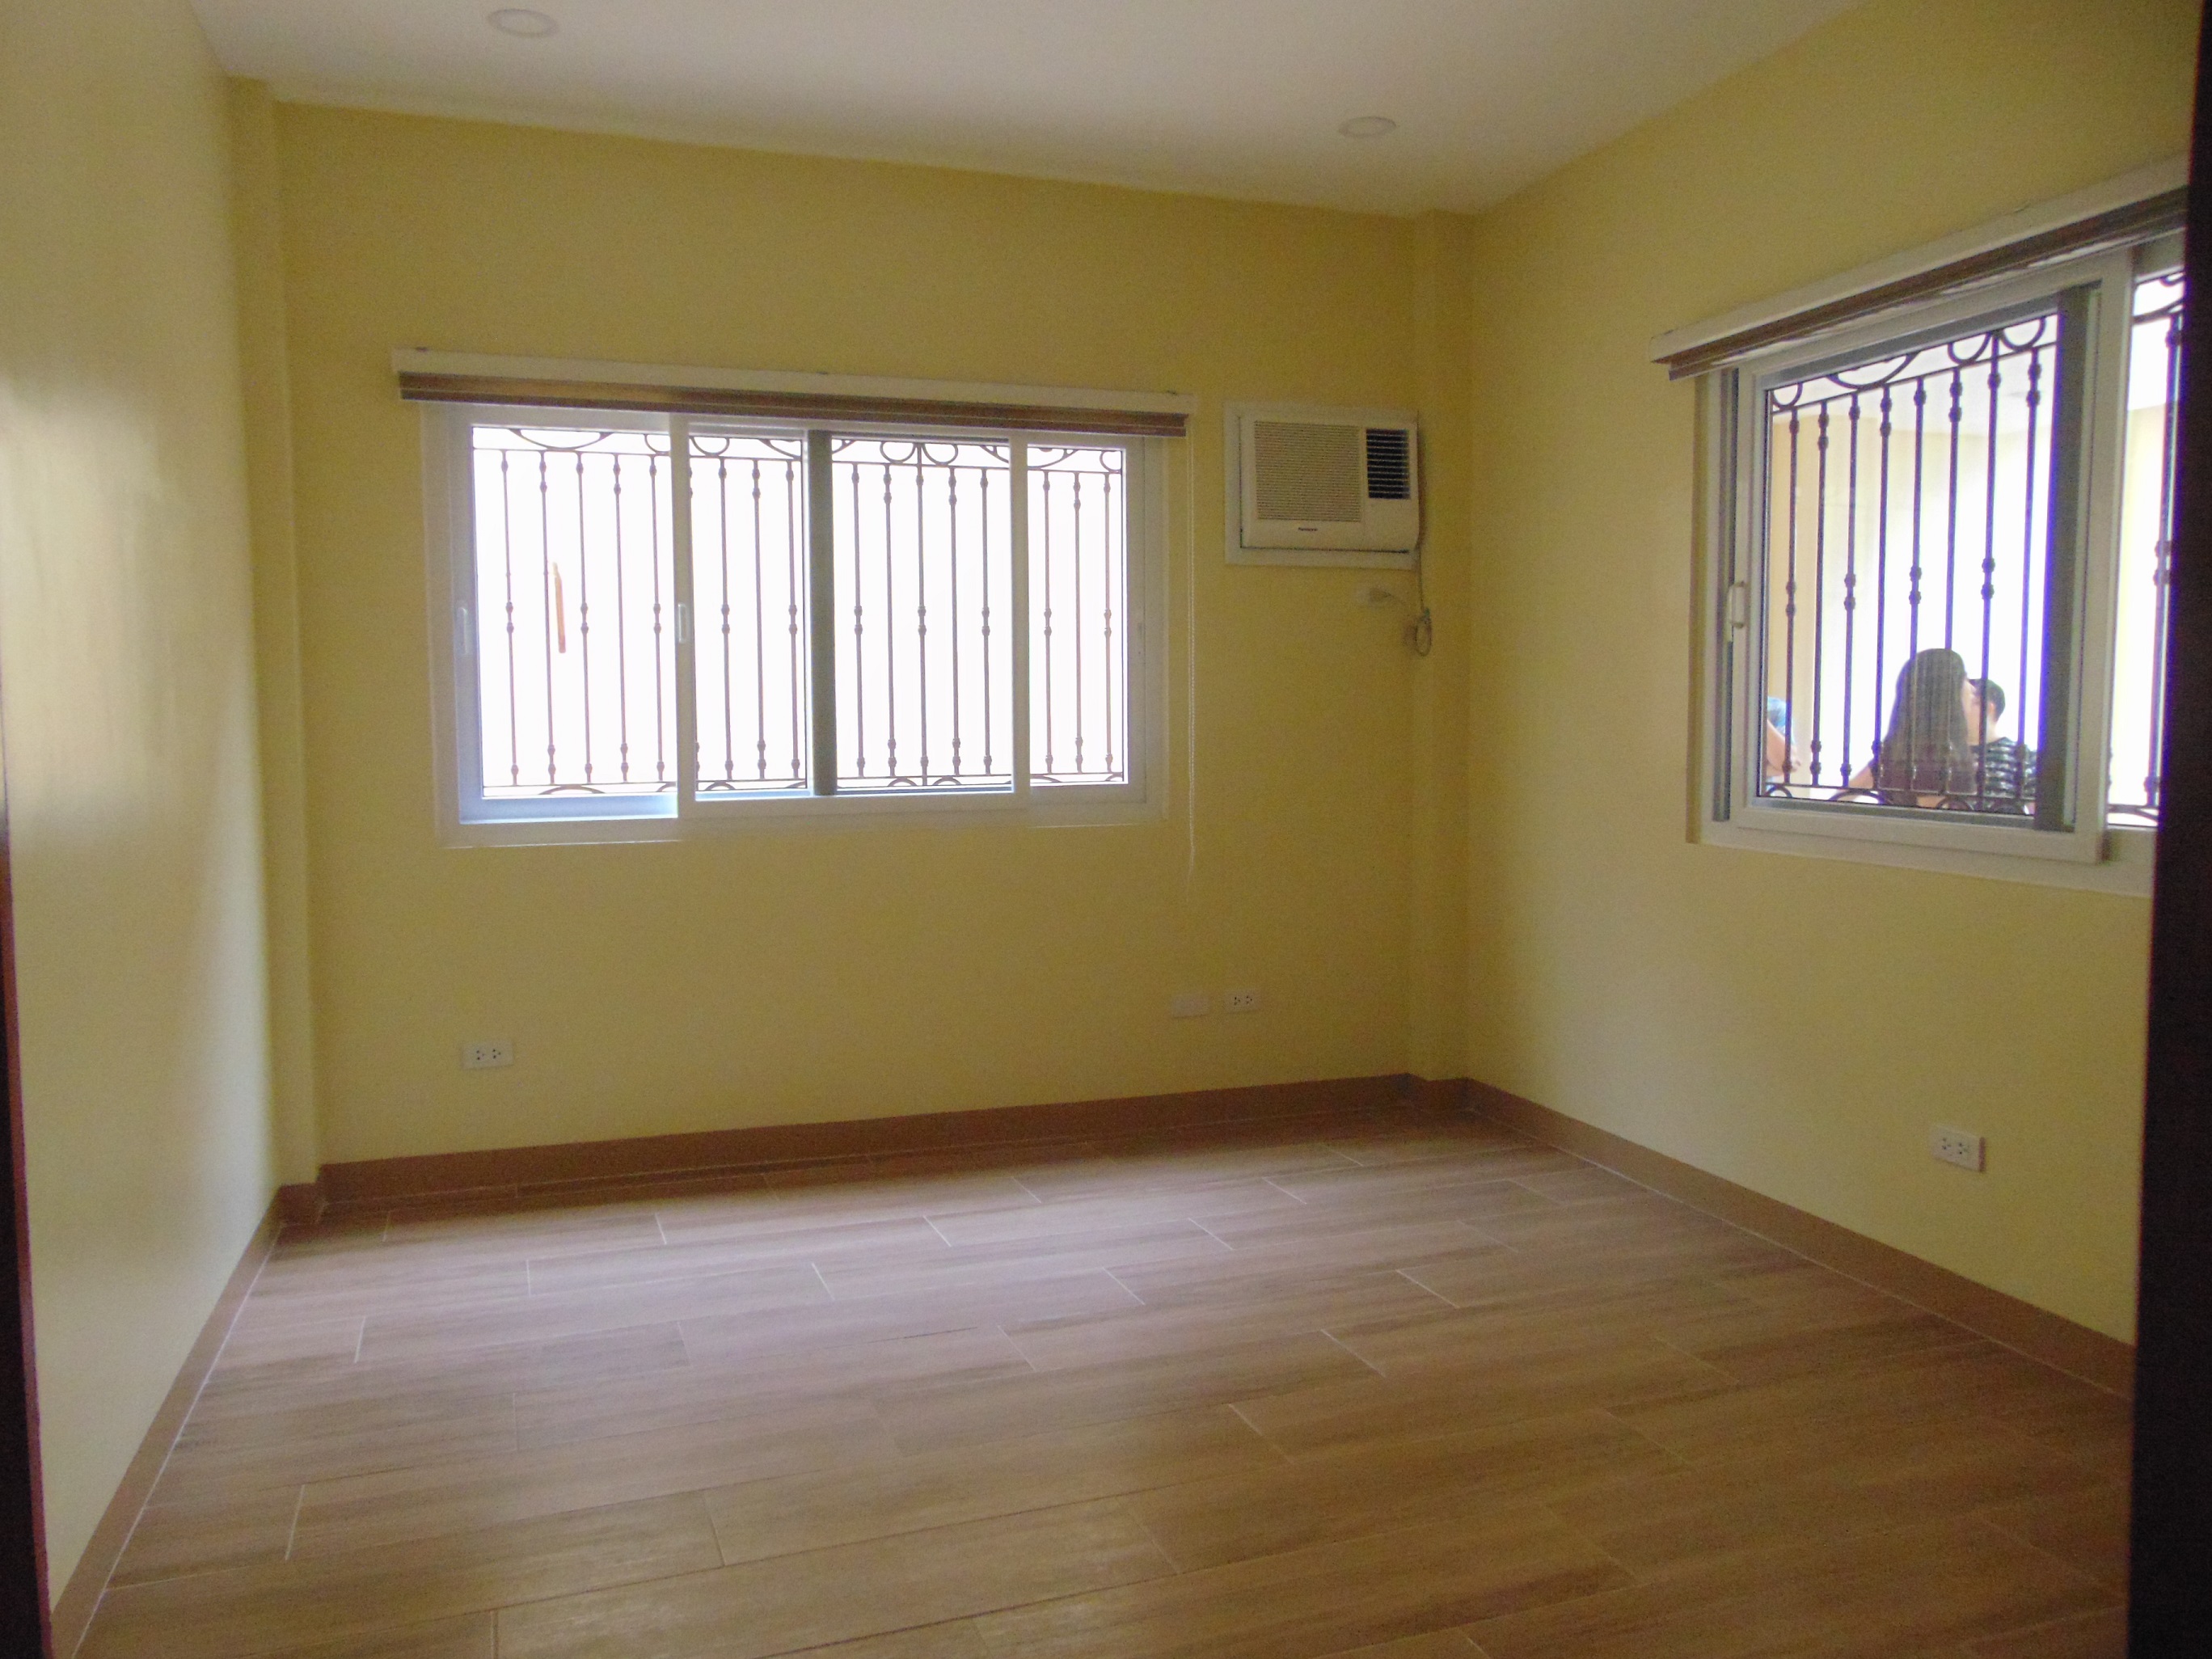 5-bedrooms-semi-furnished-duplex-house-located-in-mabolo